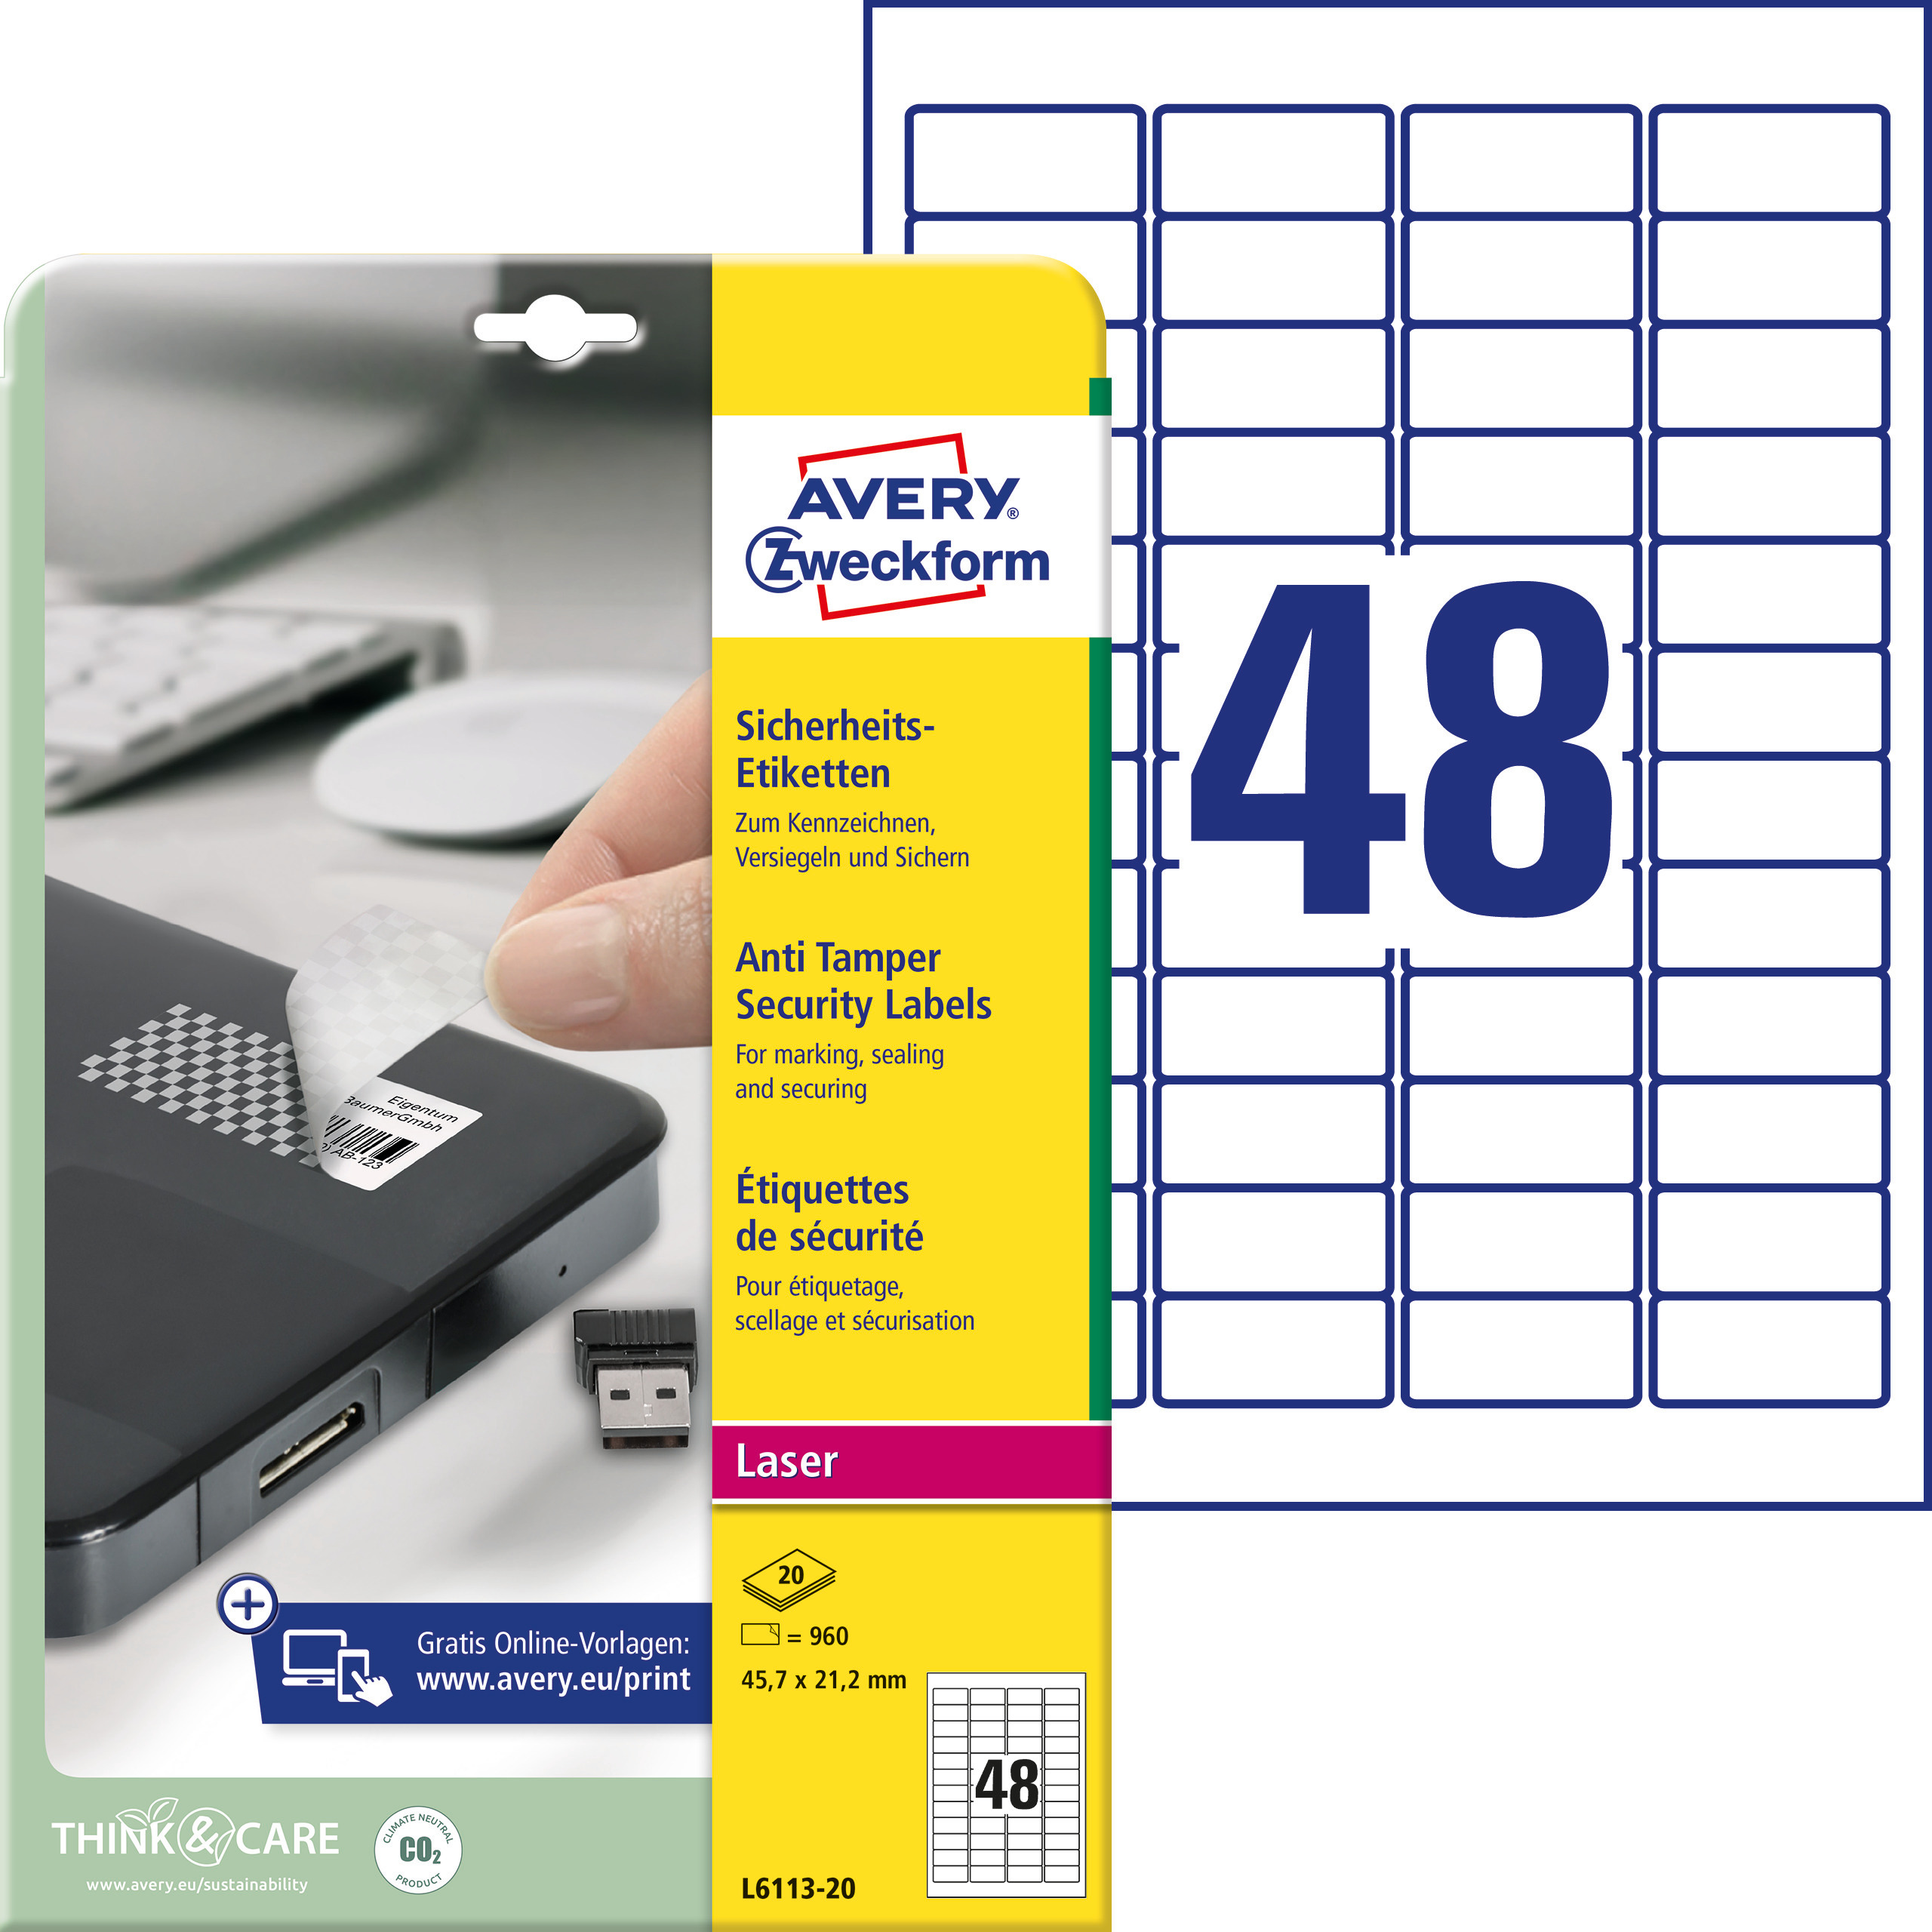 Self-adhesive durable labels polyester film for laser printers and copiers - 48 labels per sheet